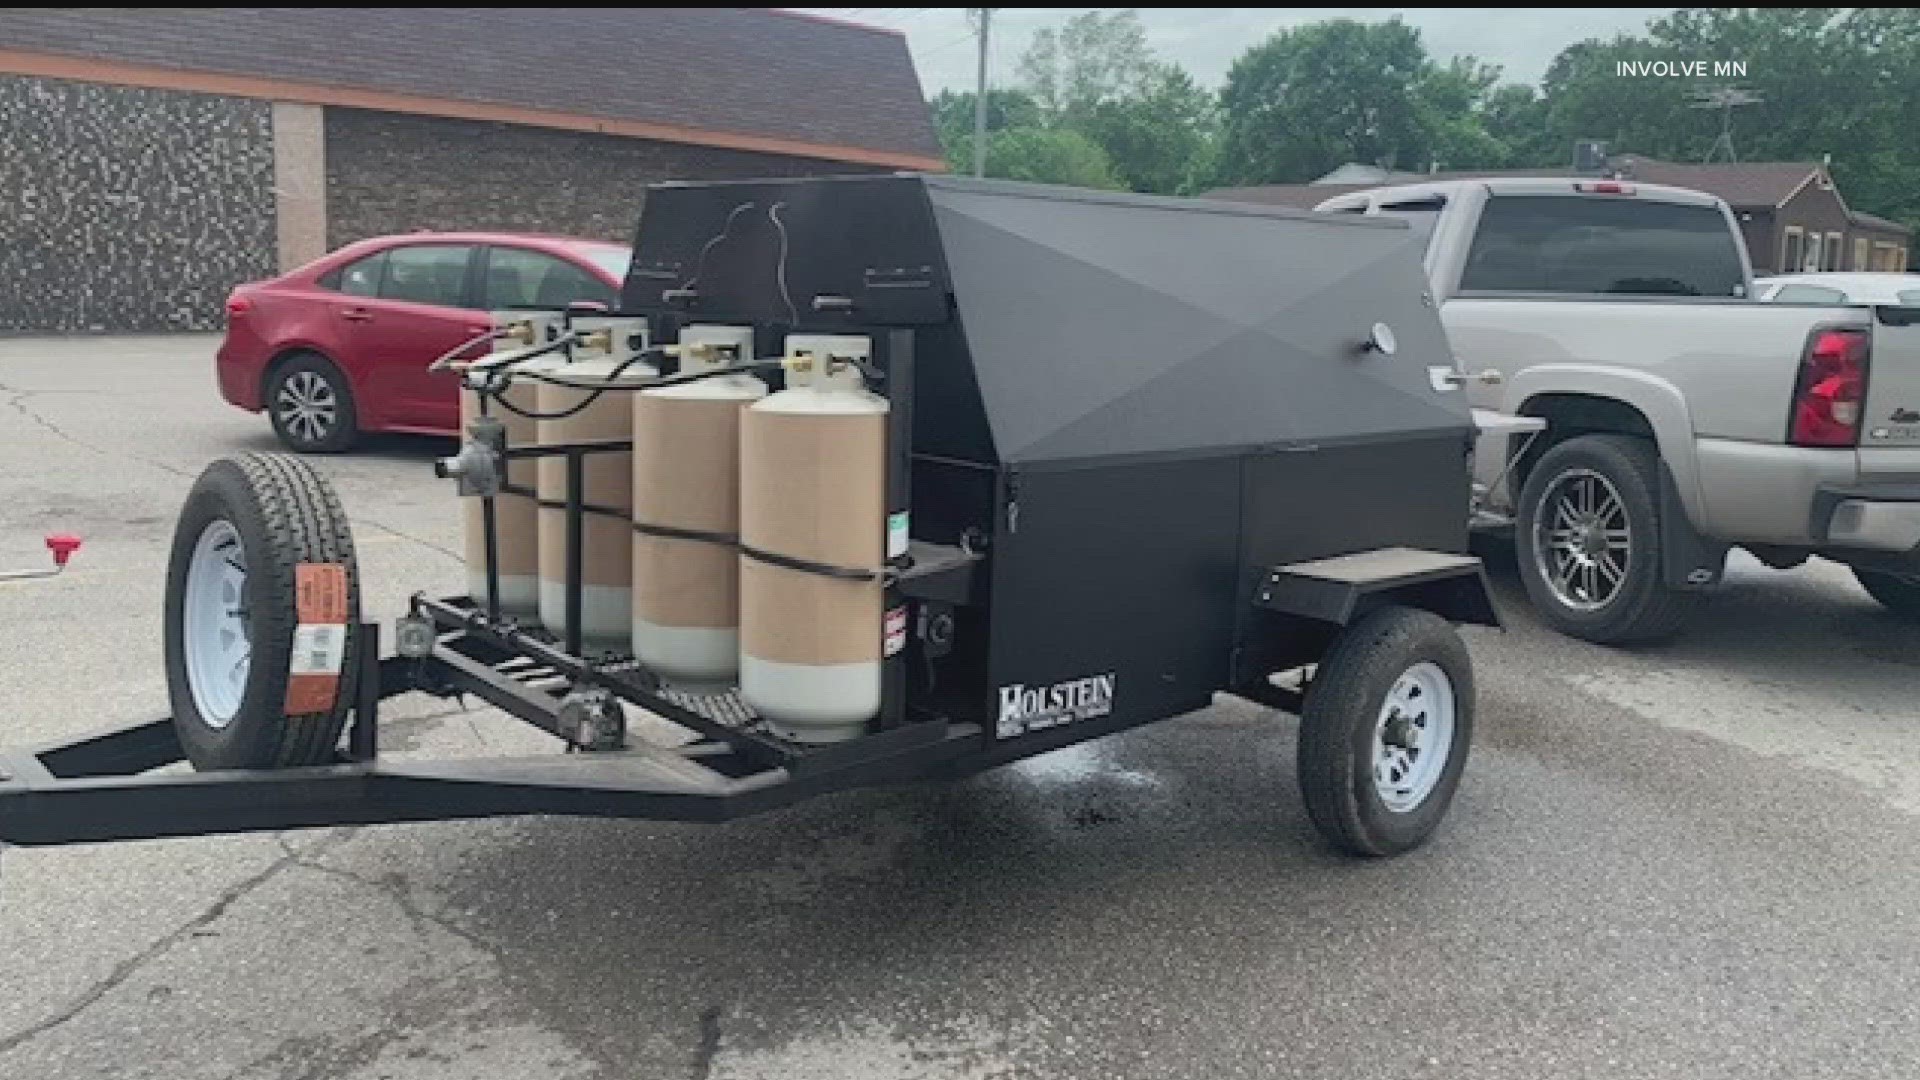 The nonprofit Involve MN believes a thief took their large cooking grill overnight on April 4.